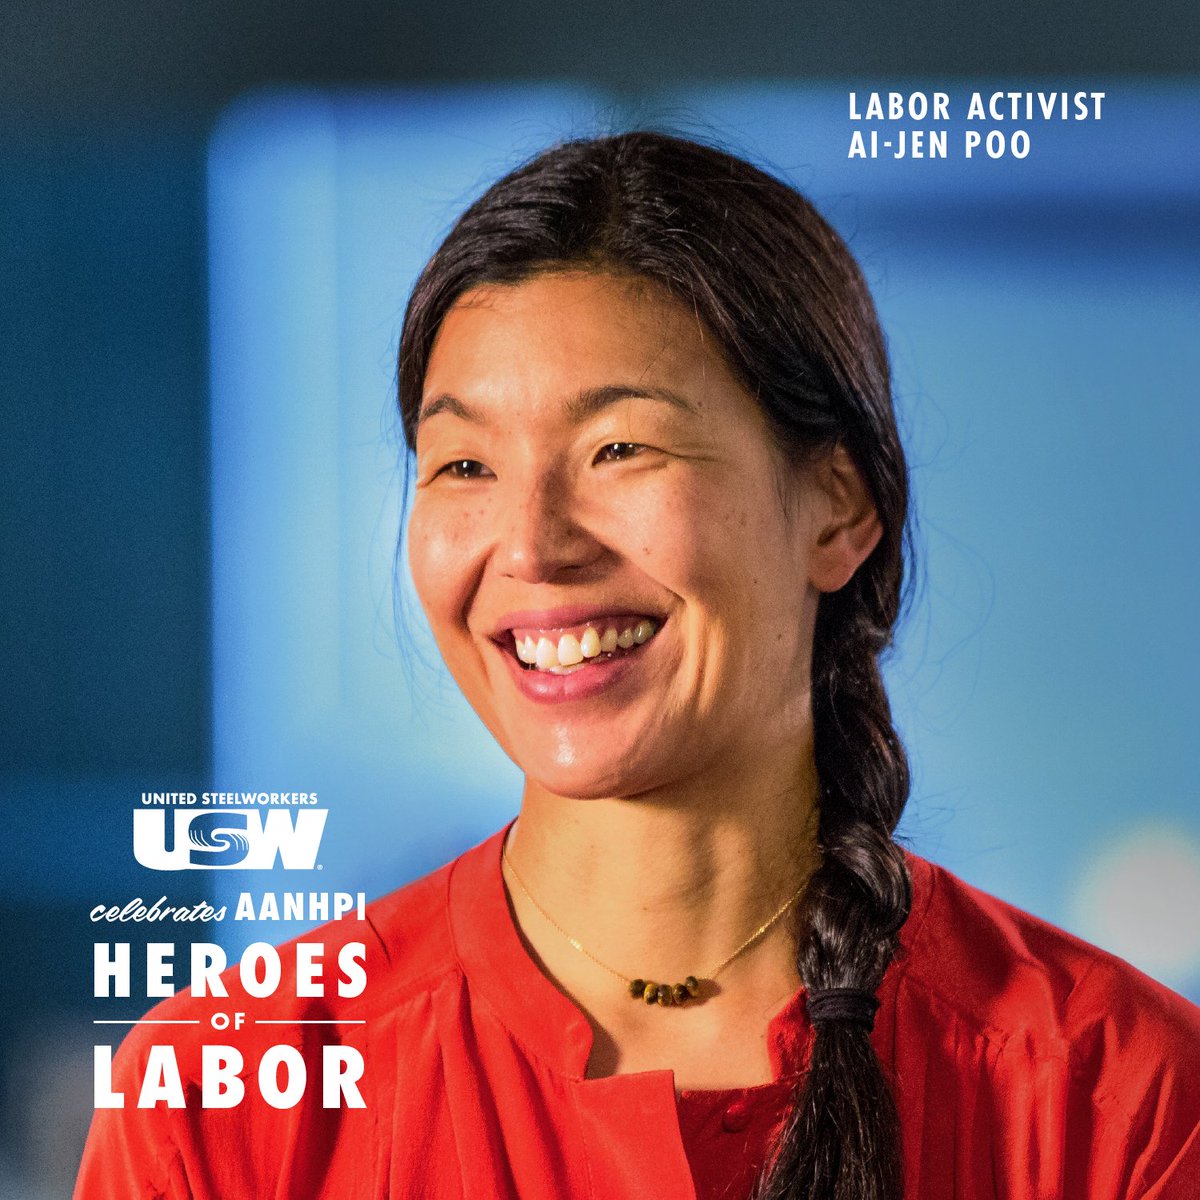 The USW continues to celebrate #AANHPI Heritage Month by applauding the work of labor activist Ai-jen Poo. She serves as the president of the National Domestic Workers Alliance, which seeks fair treatment for low-income laborers.